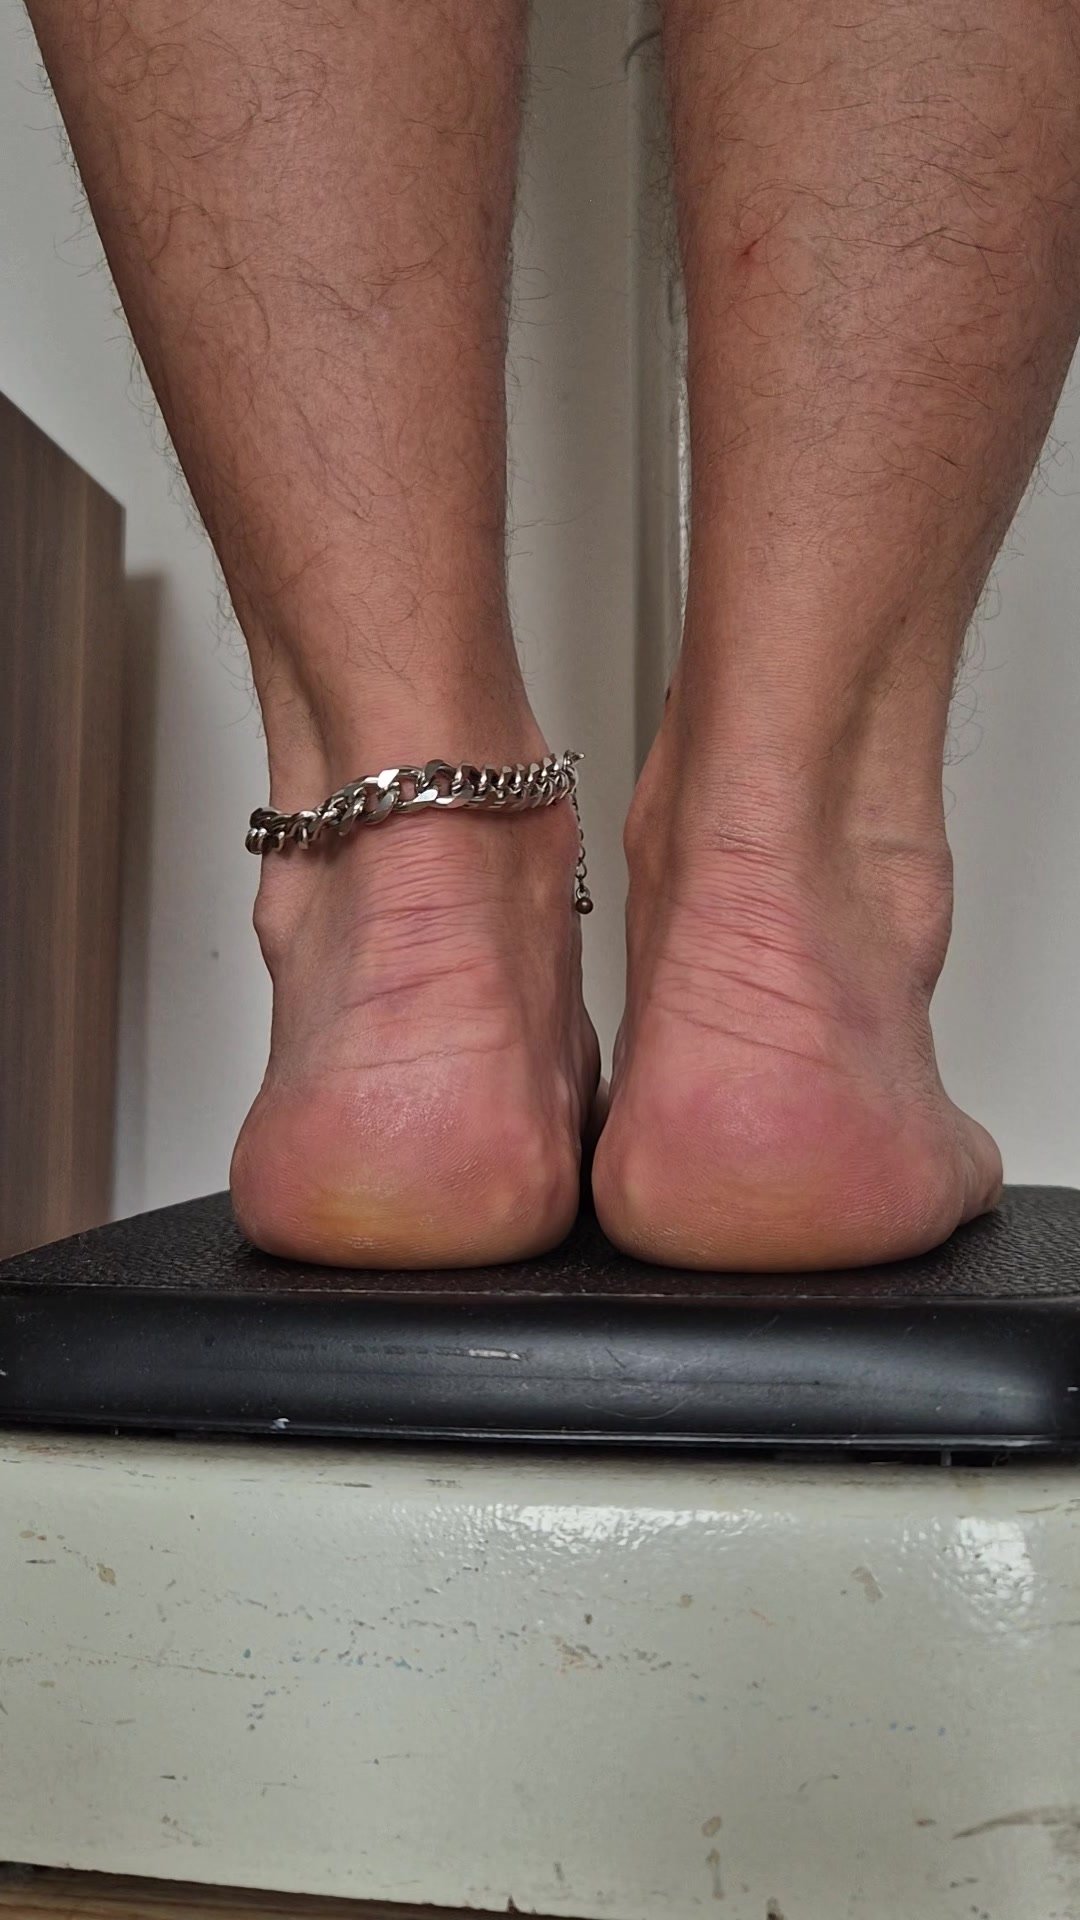 Feet on Weight Scales